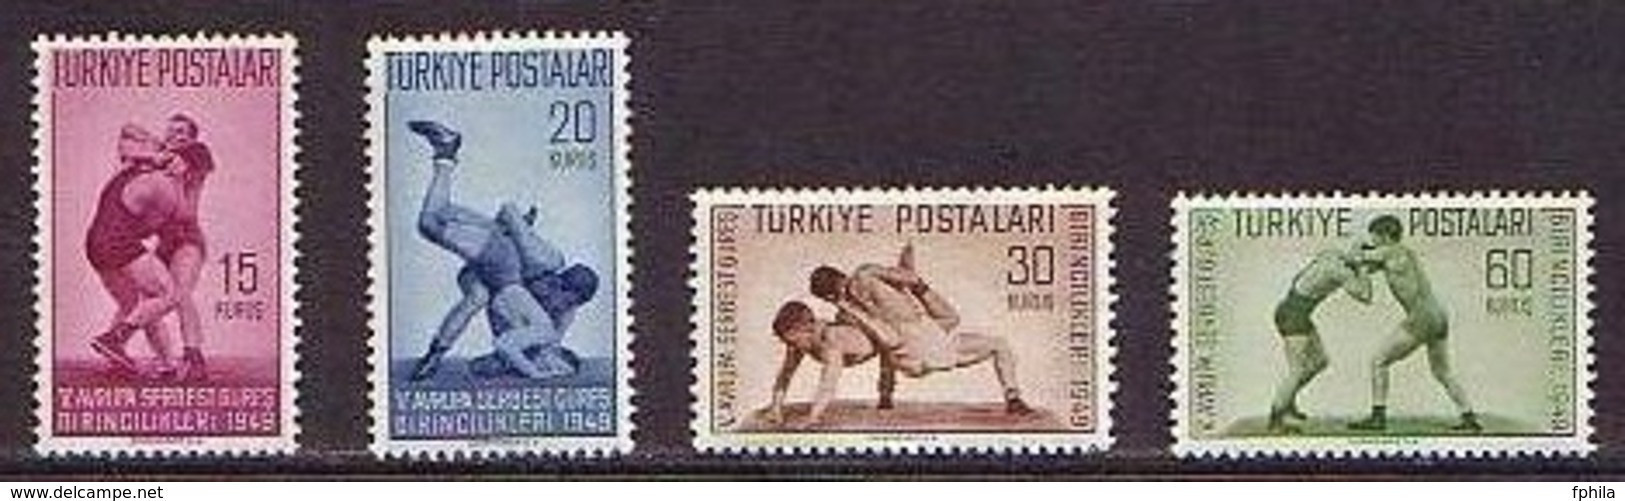 1949 TURKEY THE 5TH EUROPEAN WRESTLING CHAMPIONSHIPS MNH ** - Unused Stamps